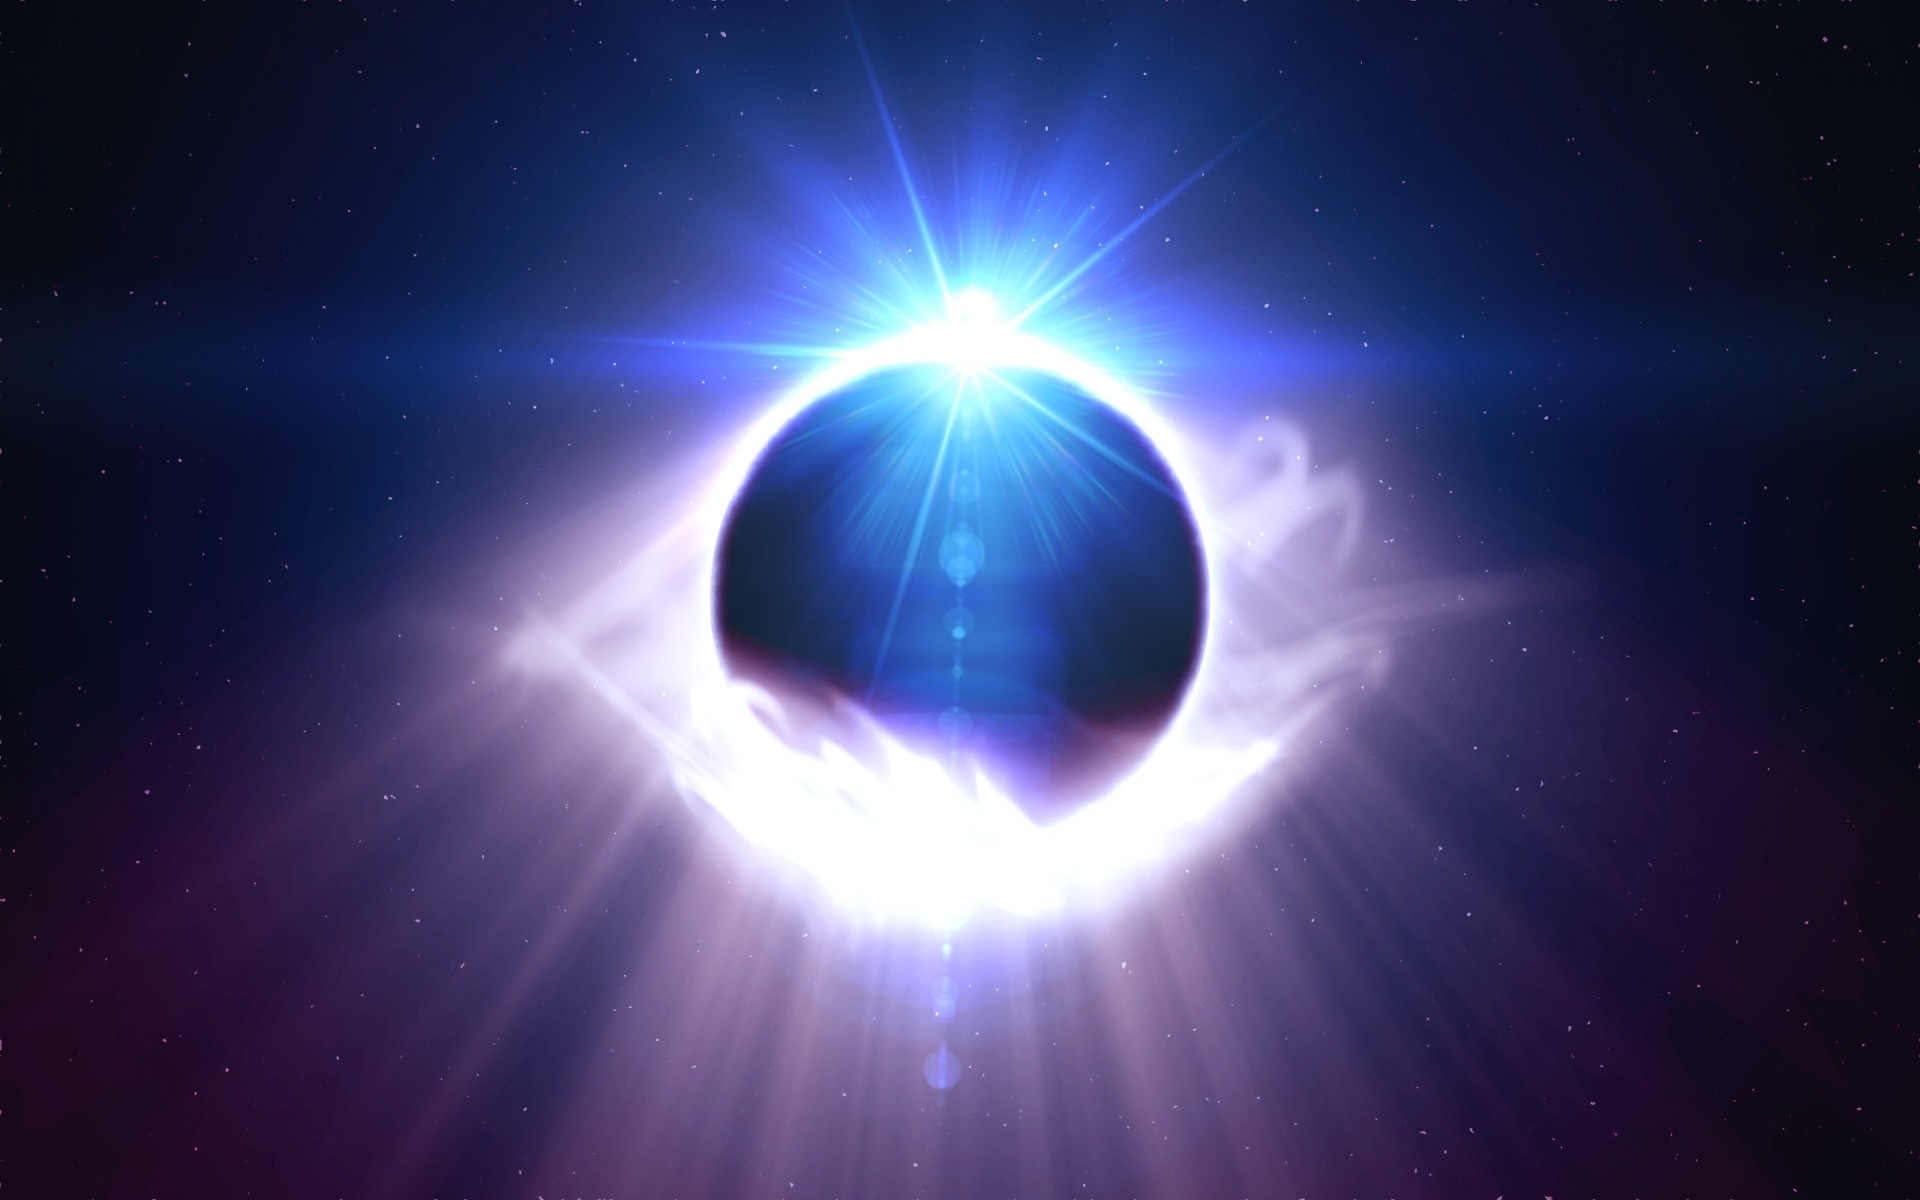 abstract planet astronomy moon space ball-shaped atmosphere sun galaxy solar exploration astrology eclipse light science sphere blur bright cosmos flare